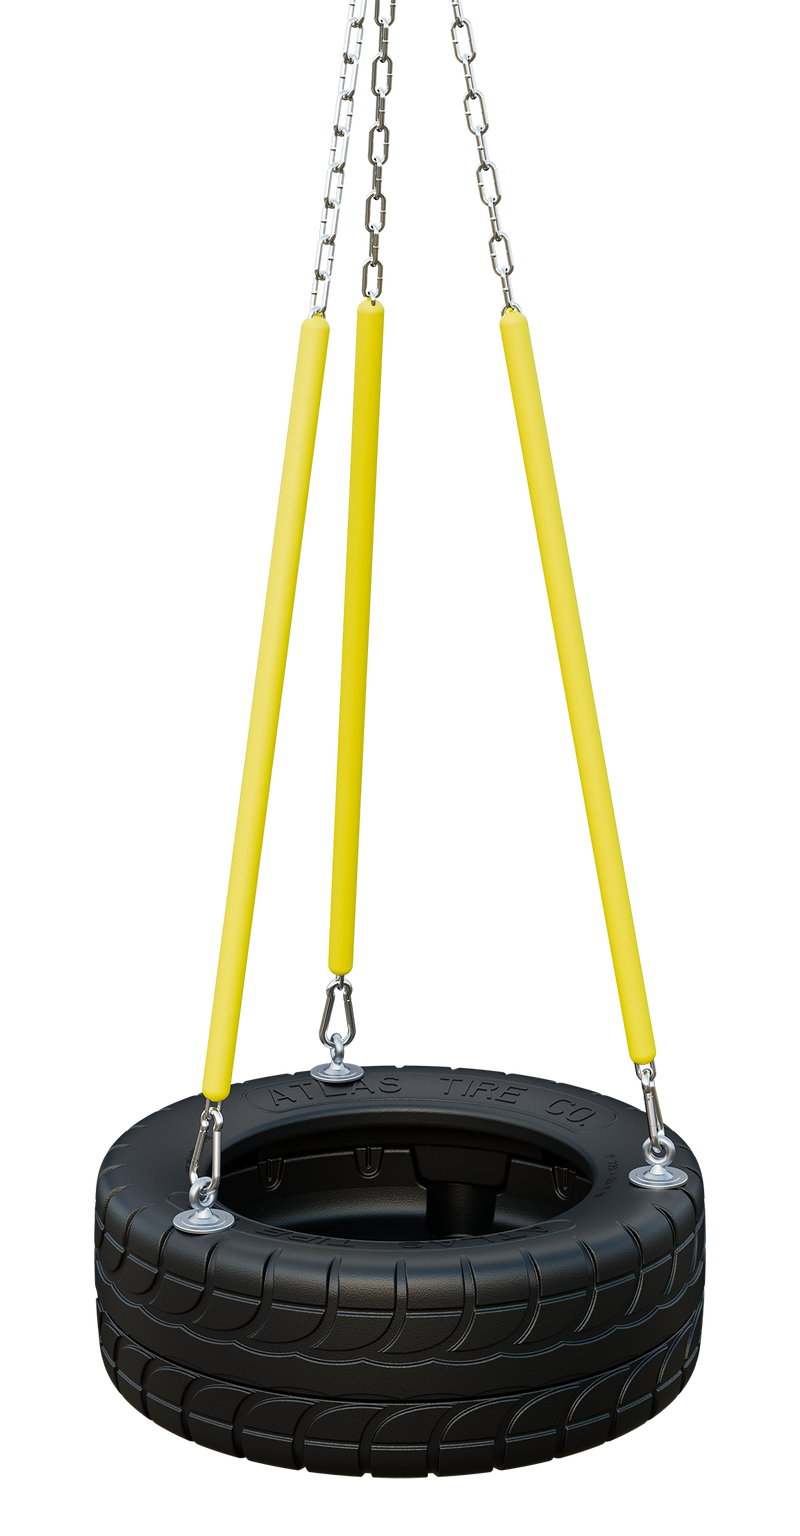 Load image into Gallery viewer, The Original TUSK Tire Swing Kit
